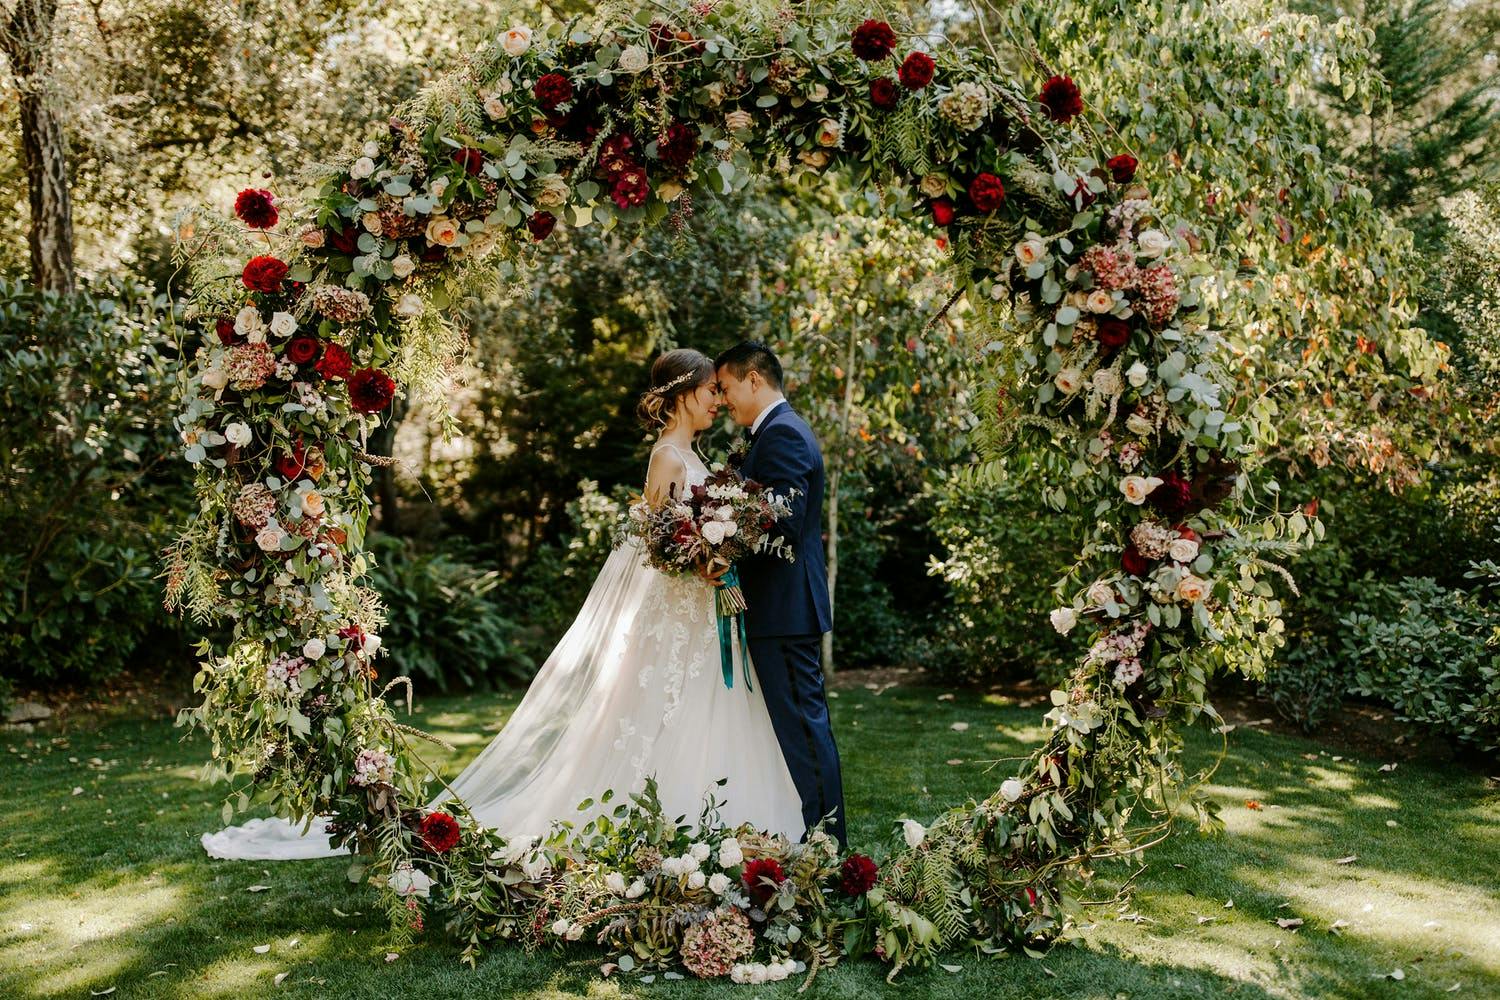 Bride and groom stand behind circular wedding arch of lavish greenery and red floral details | PartySlate